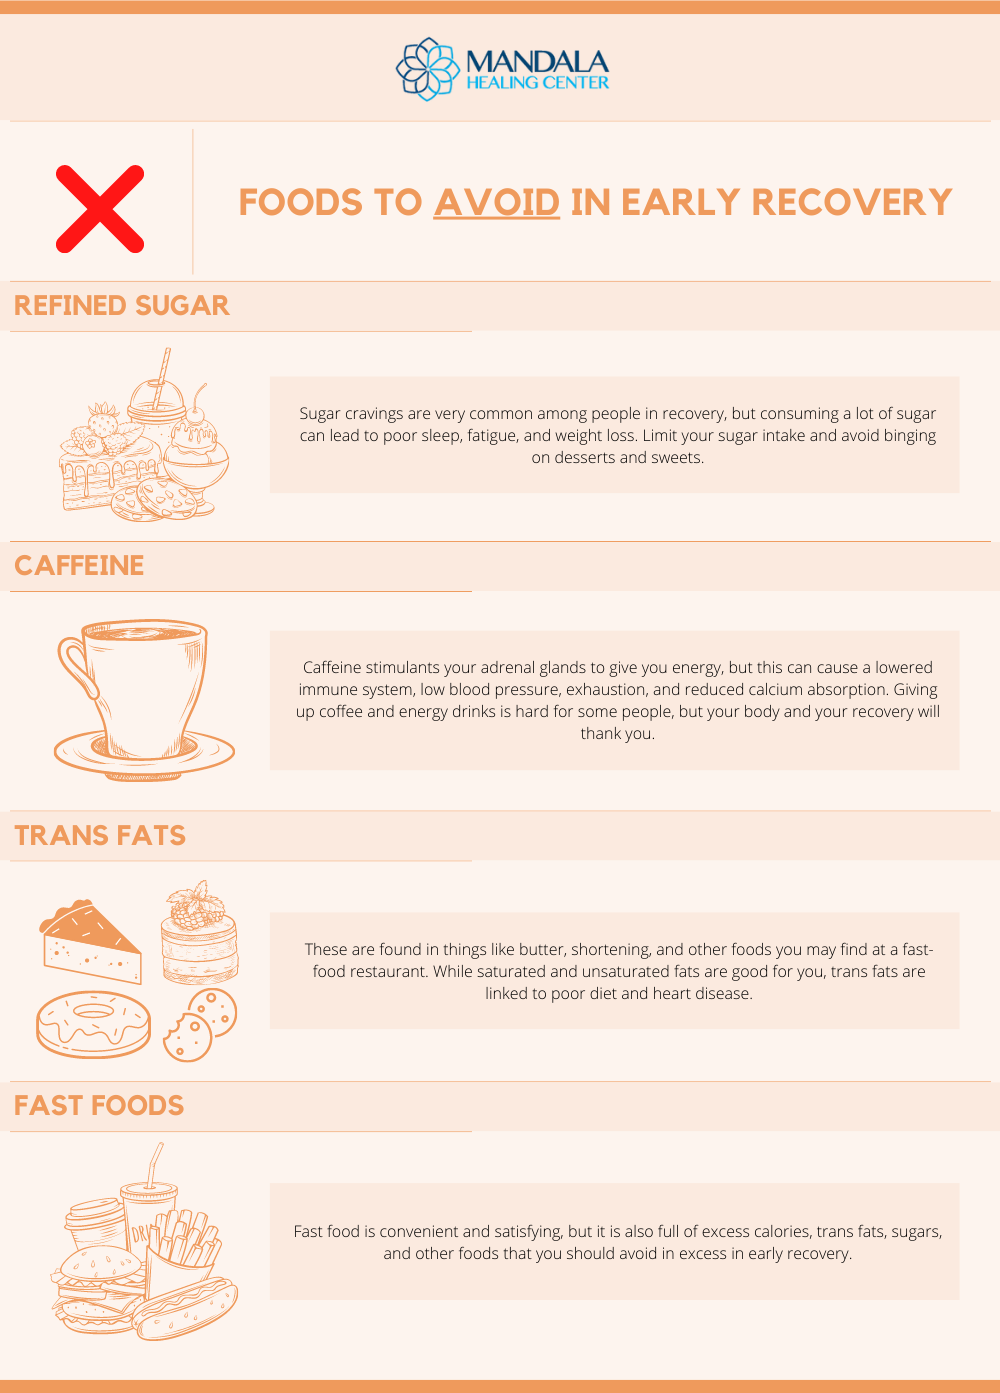 Foods to Avoid in Early Recovery